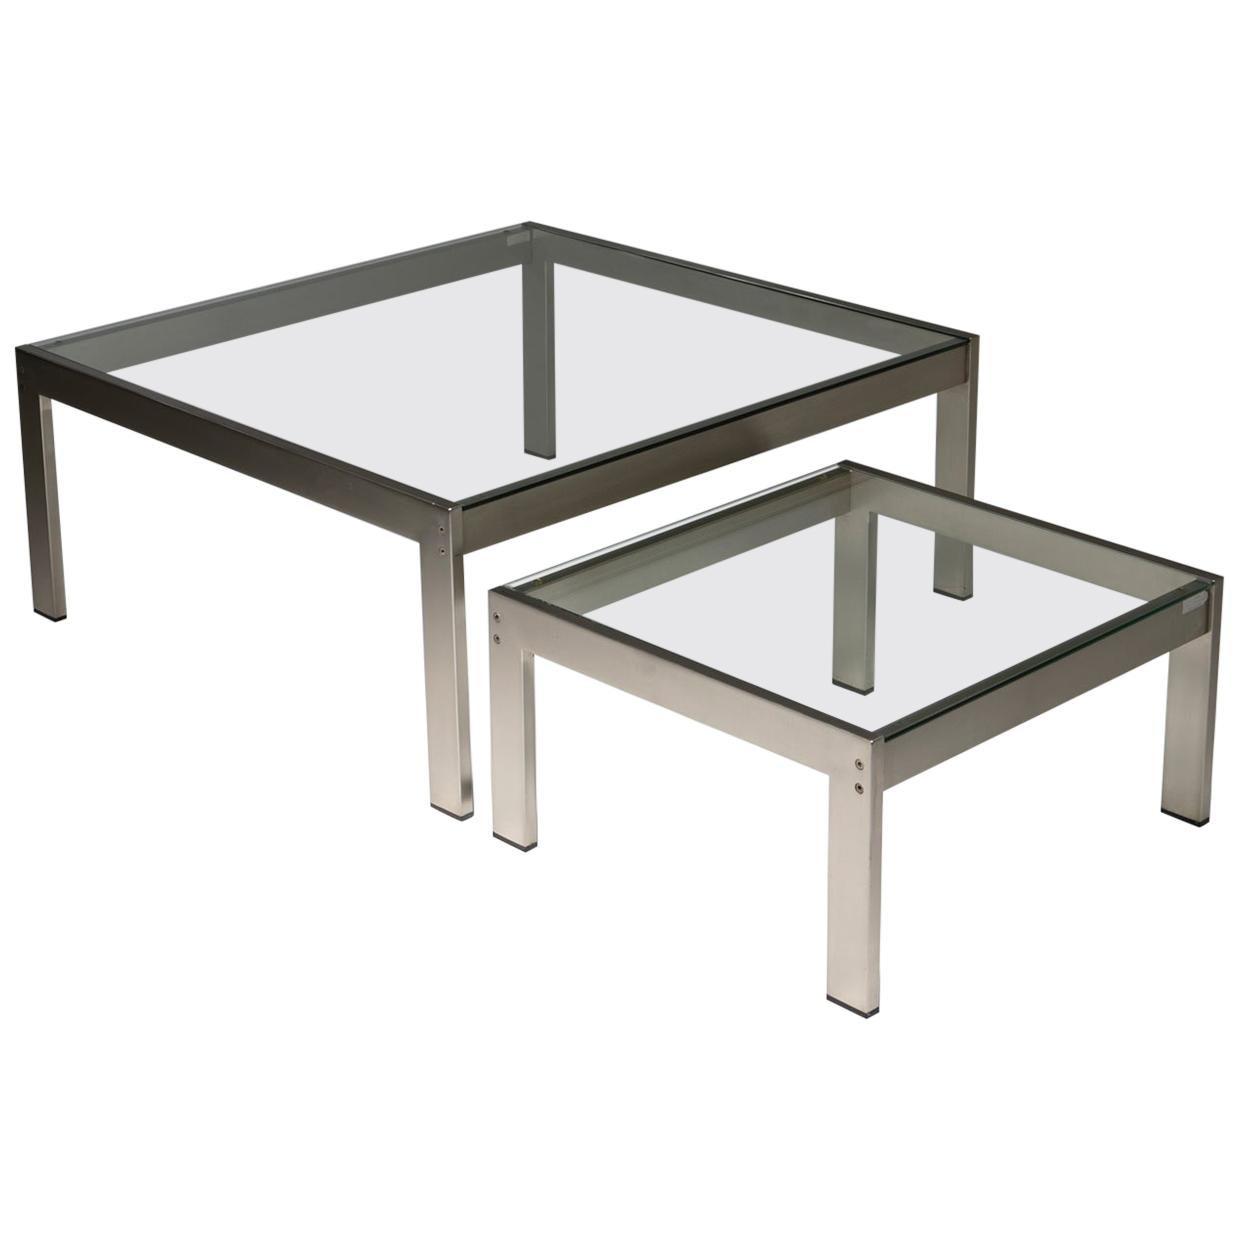 Set of Two "Tau" Steel Tables by Gae Aulenti for La Rinascente